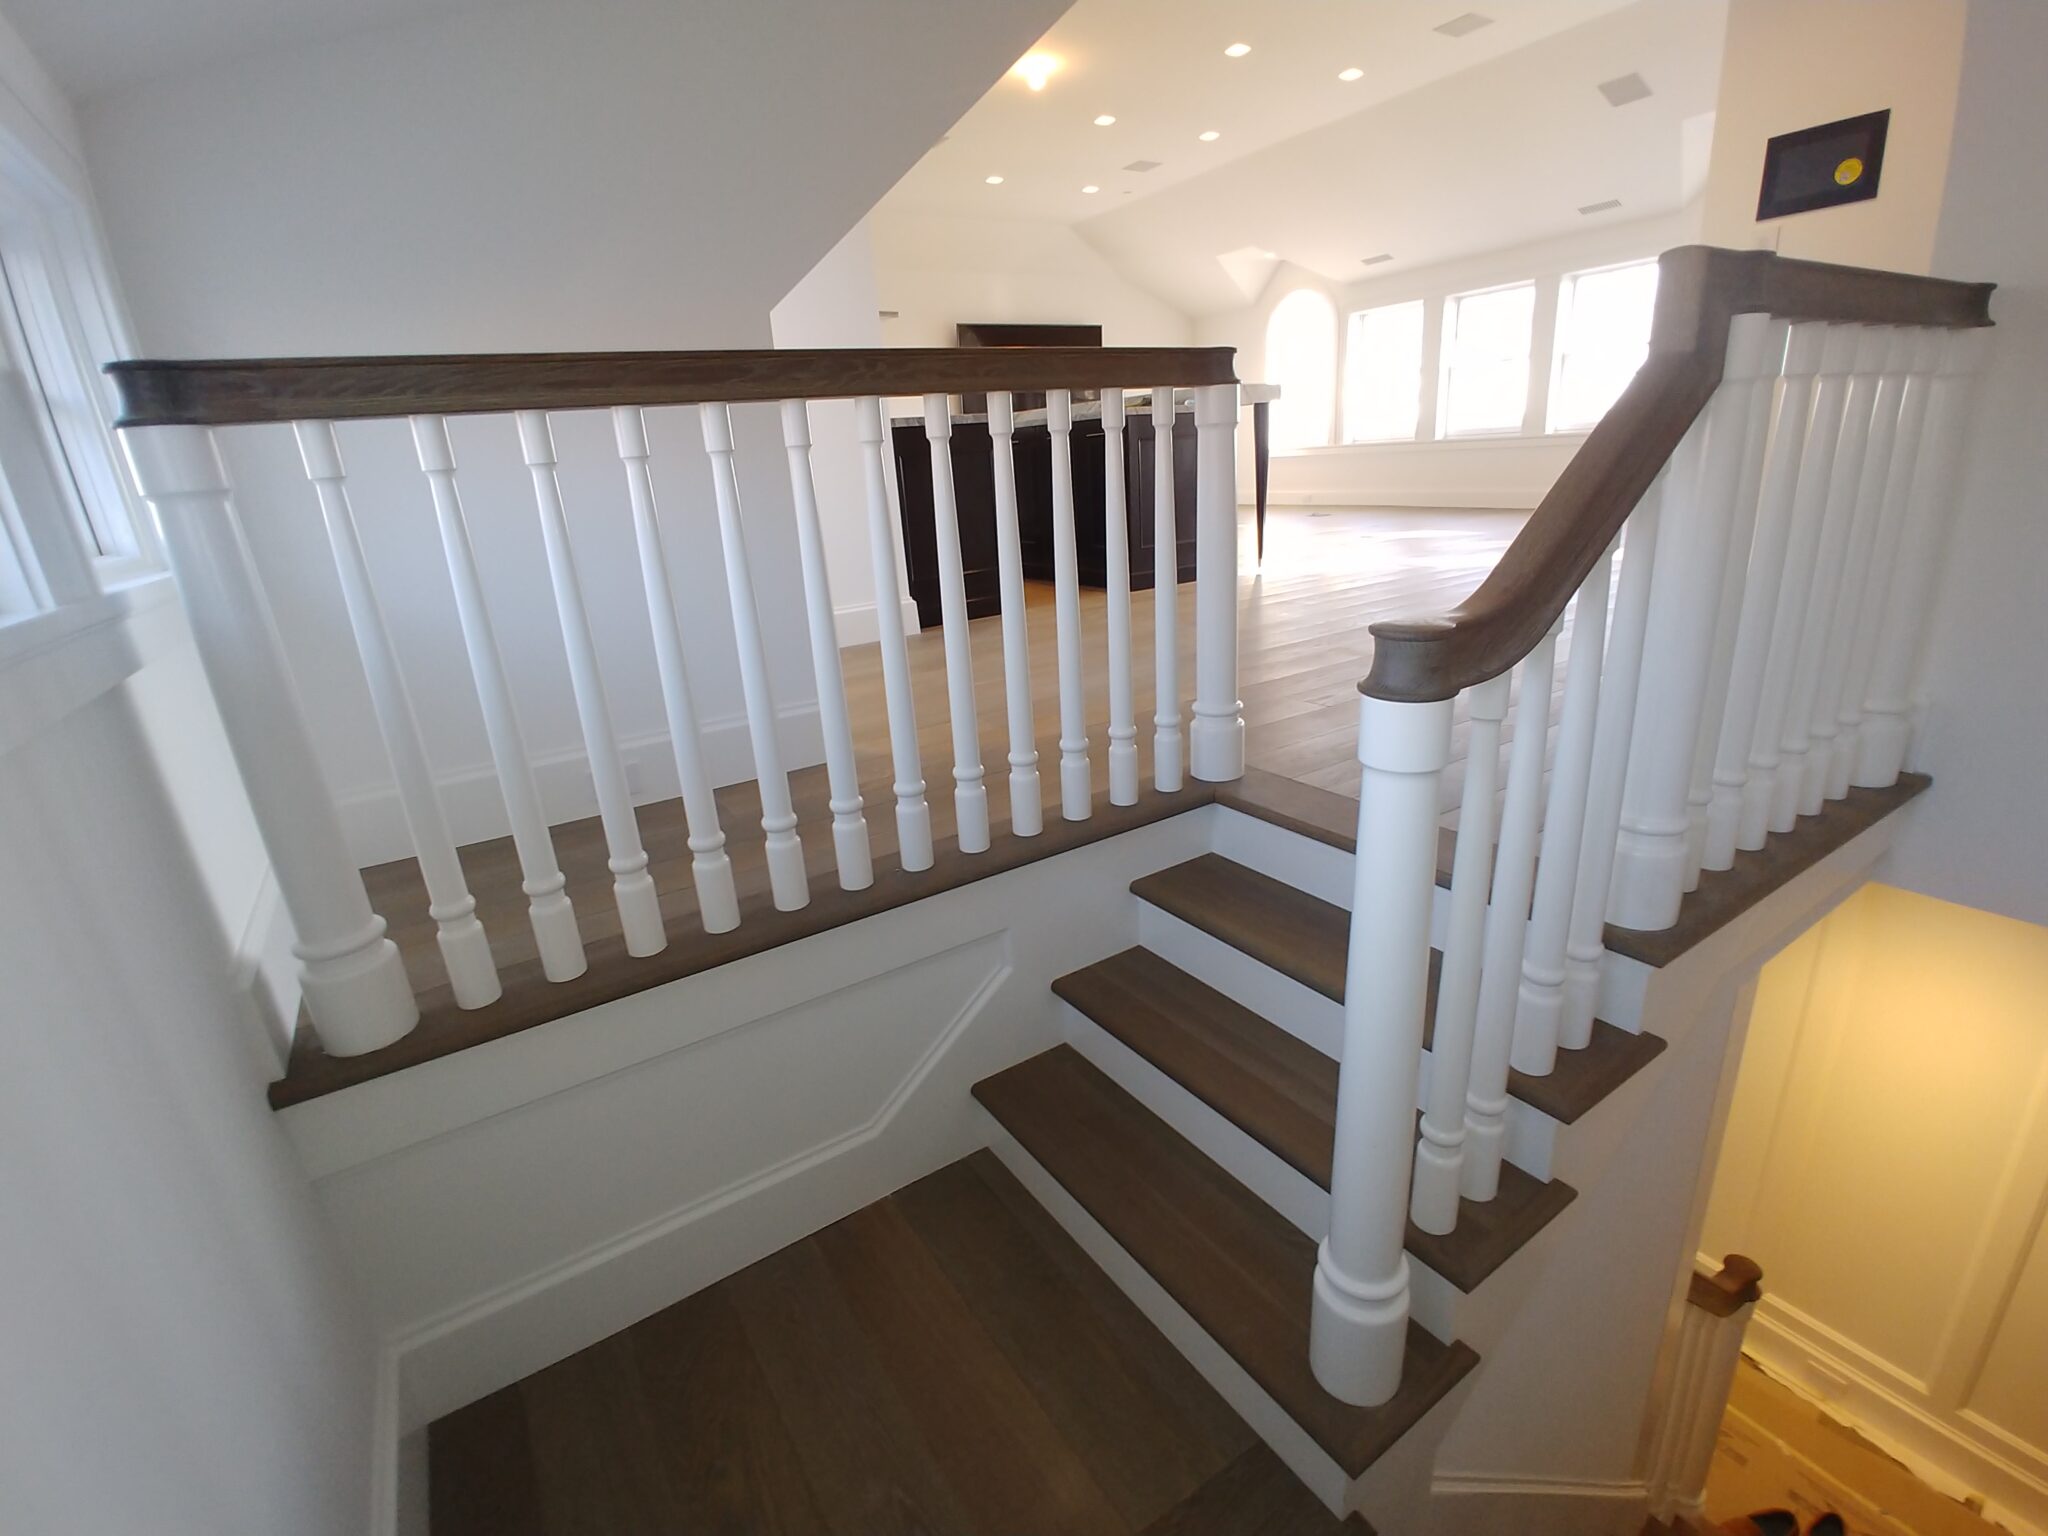 The new hardwood flooring with foyer stairs